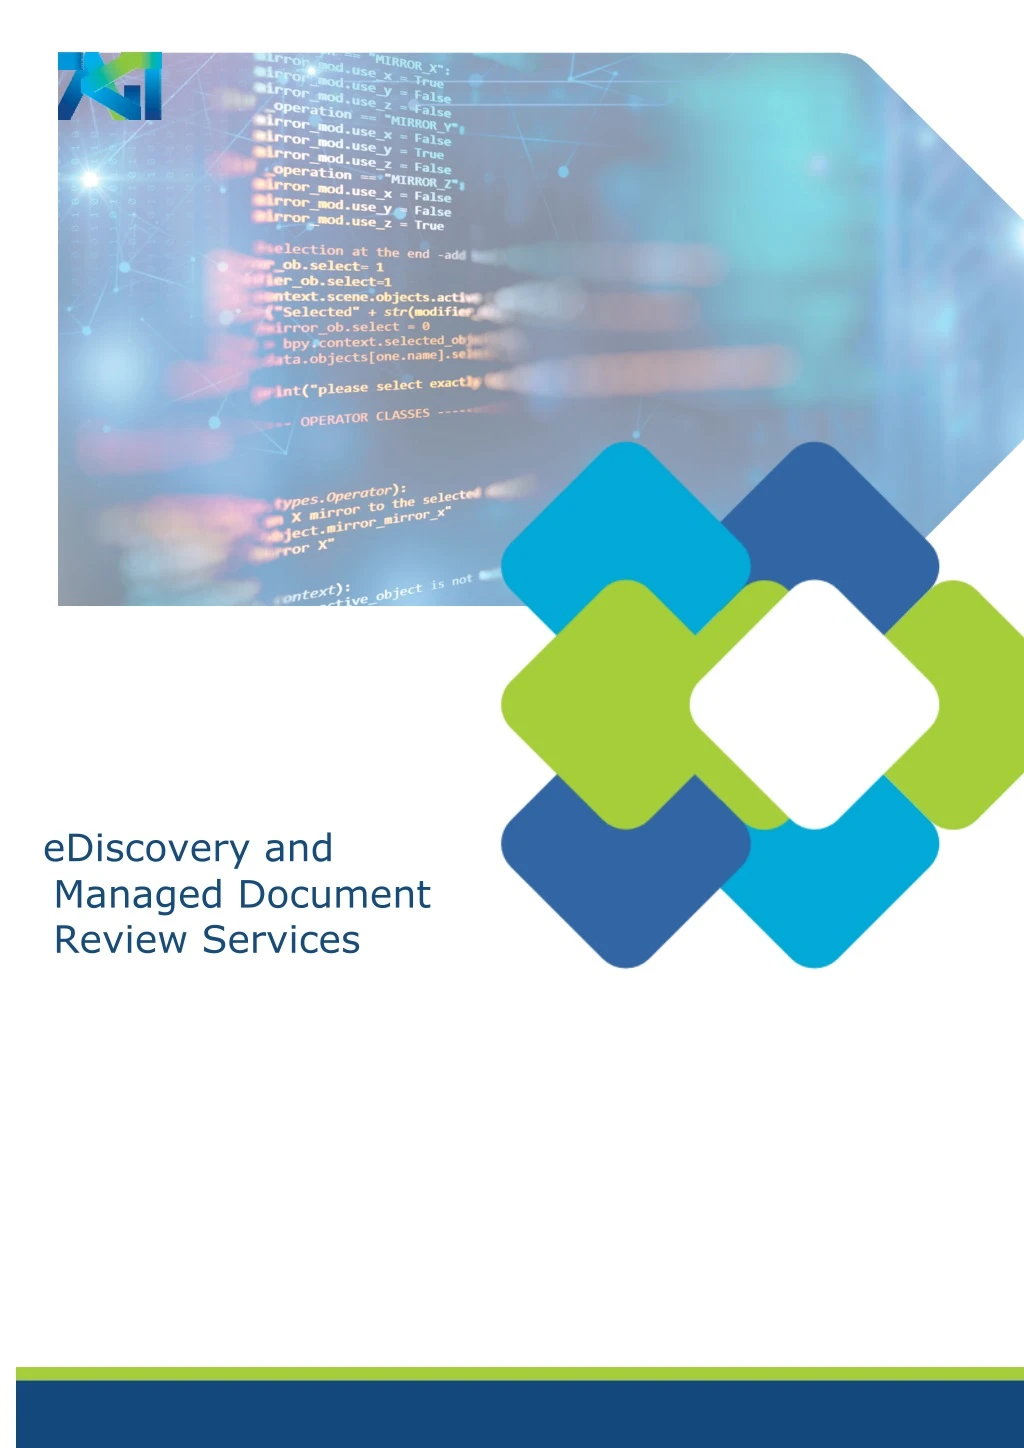 ediscovery and managed document review services